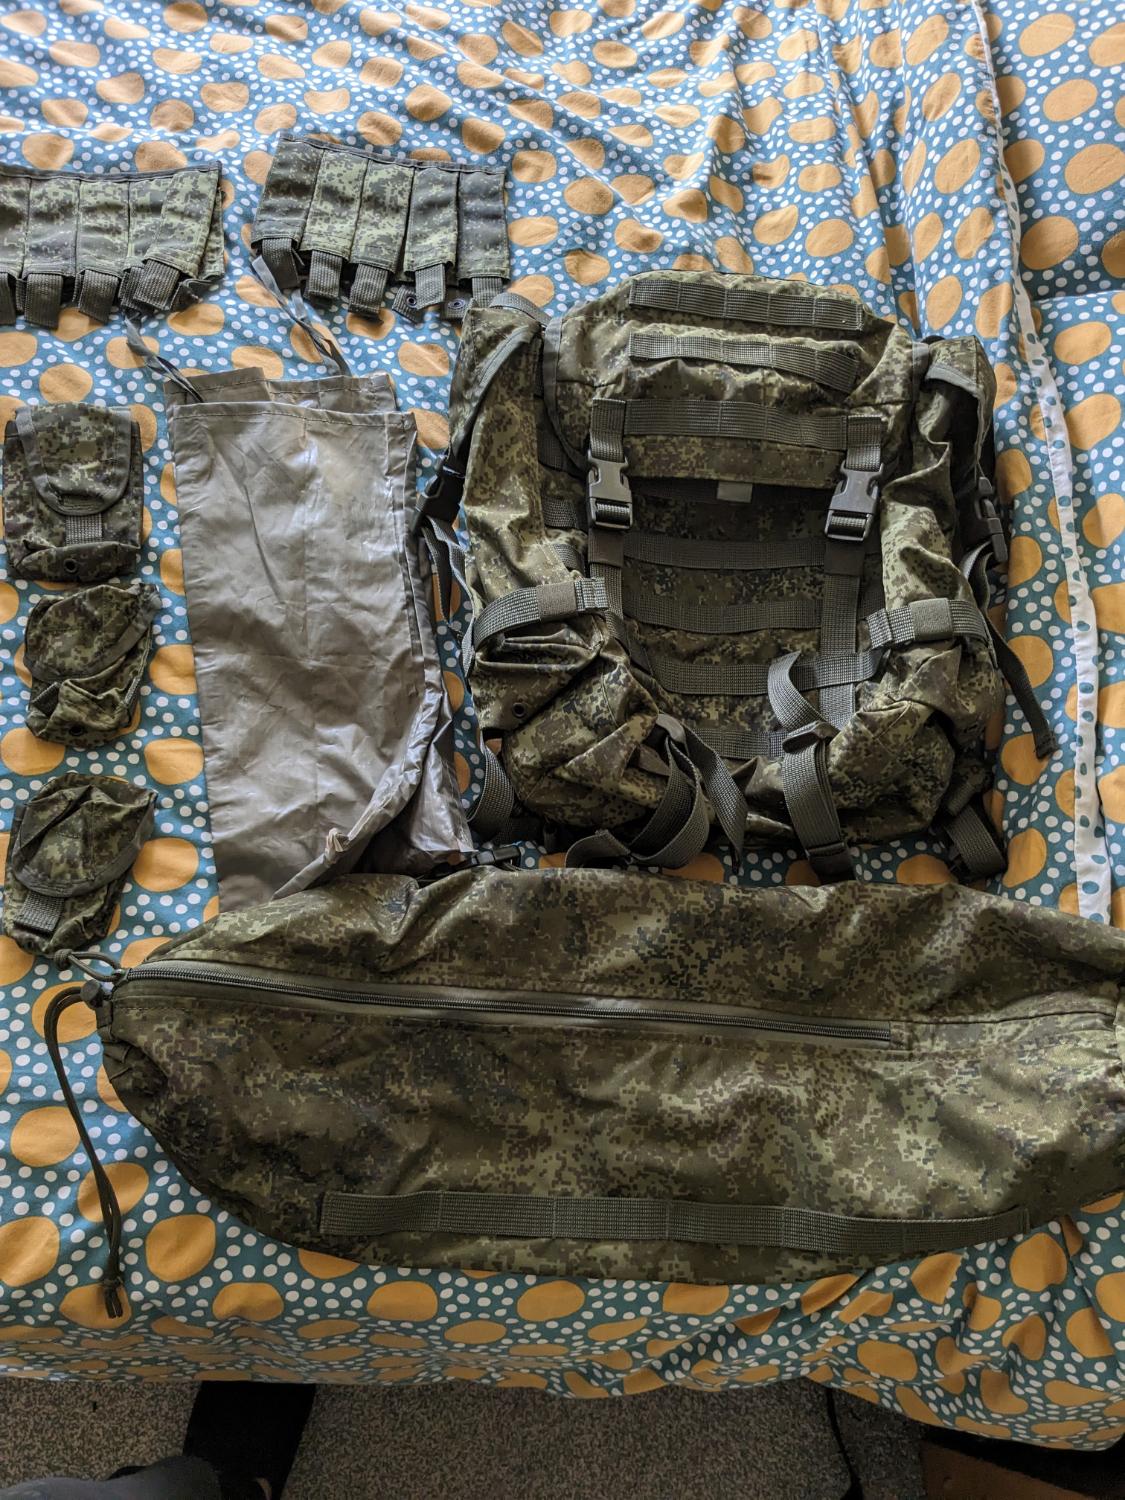 Full Russian 6sh117 vest and 25L backpack. - Gear - Airsoft Forums UK